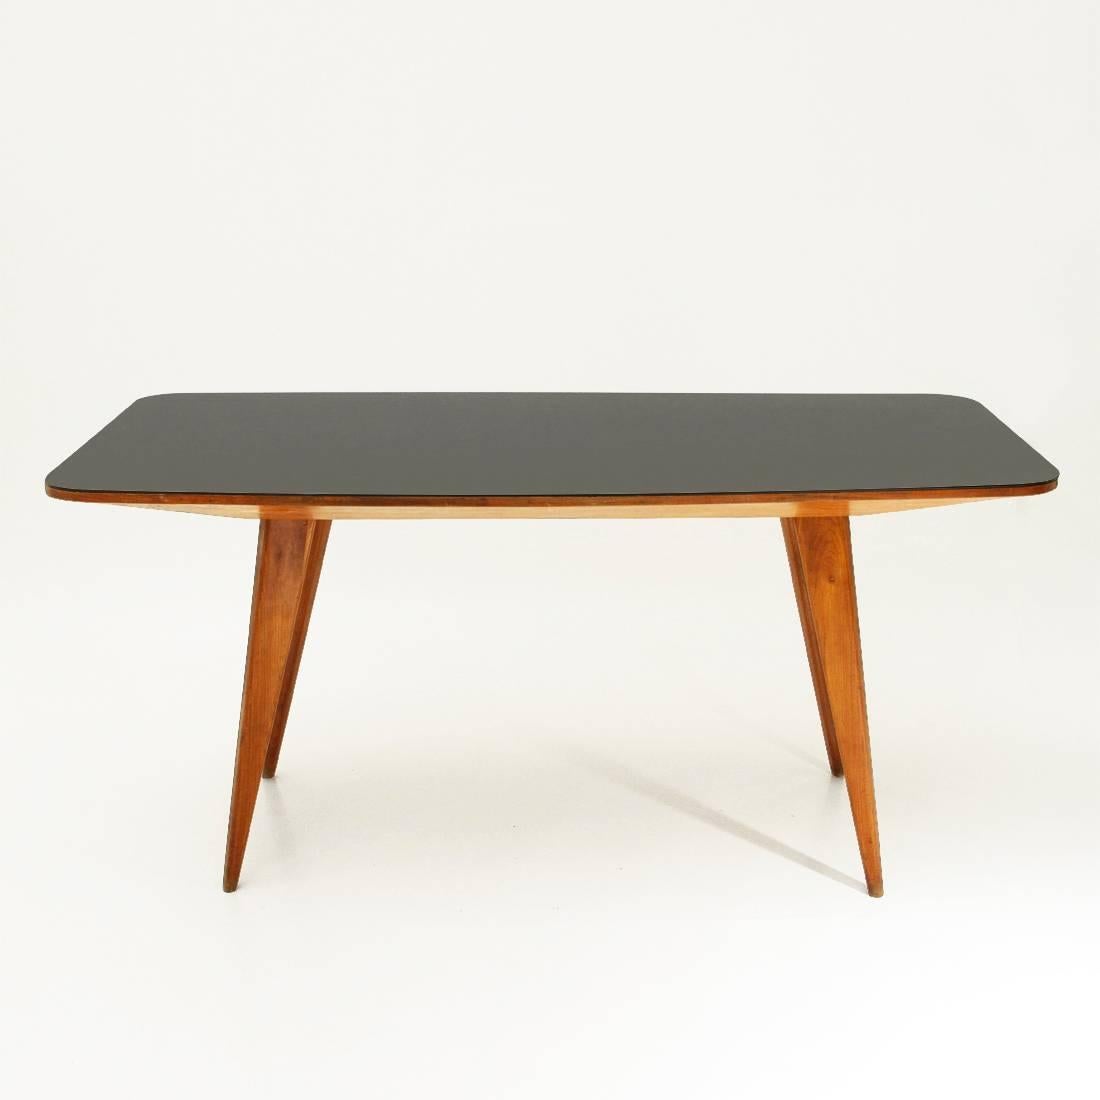 Mid-Century Modern Italian Wood Dining Table with Black Glass Top, 1950s